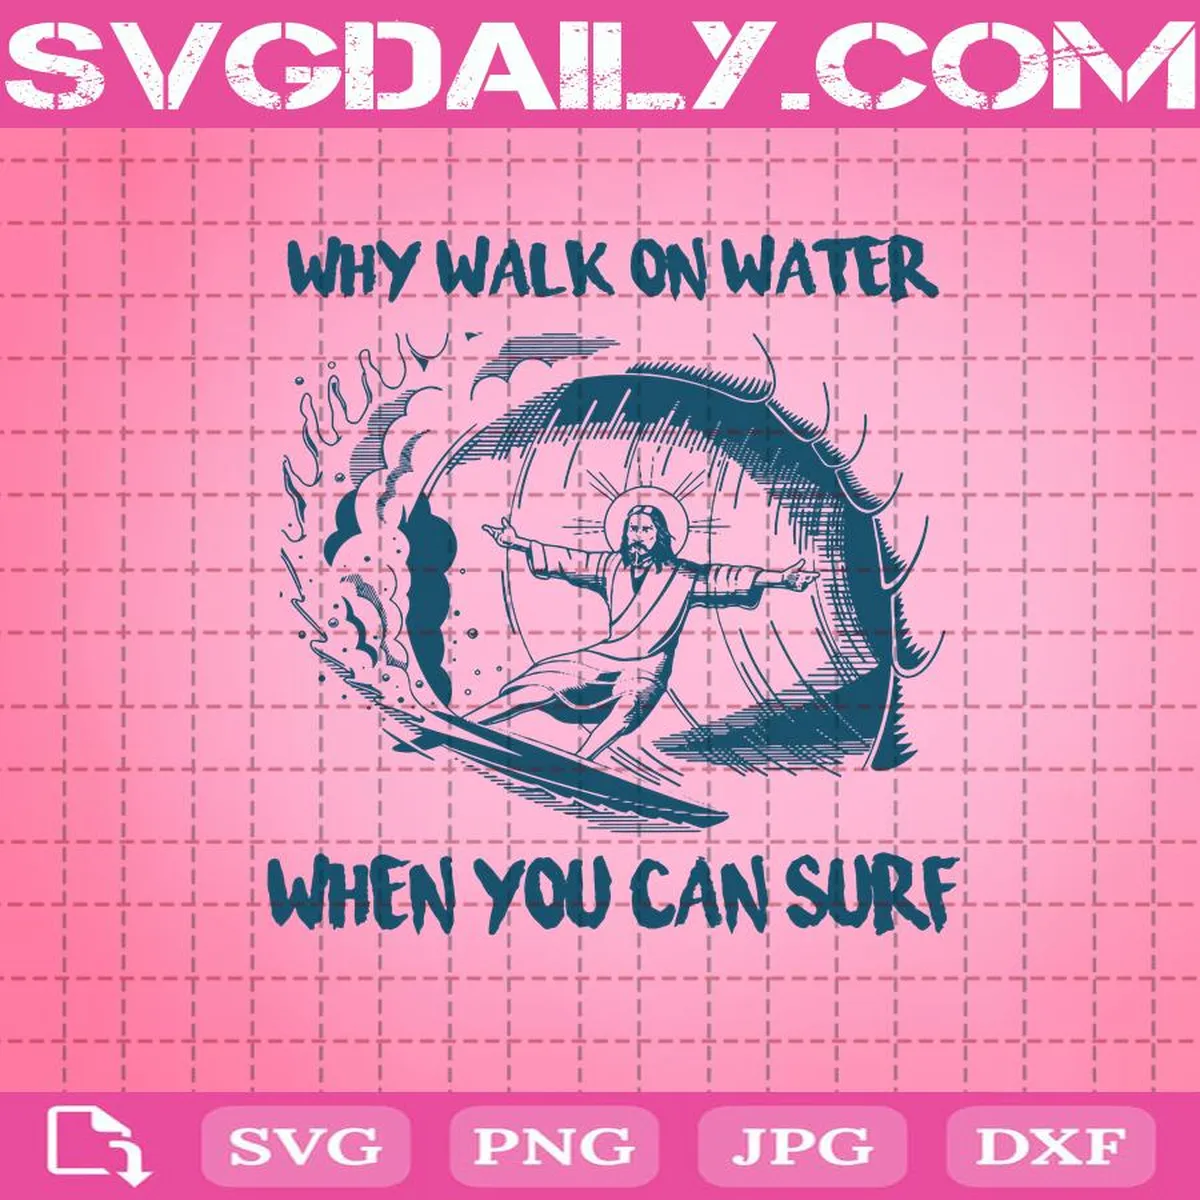 Jesus Why Walk On Water When You Can Surf Svg, Jesus Surfing Svg, Surf Svg, Surfing On Water Svg, Jesus Svg, Jesus Gift, Jesus Surfing On Water Svg